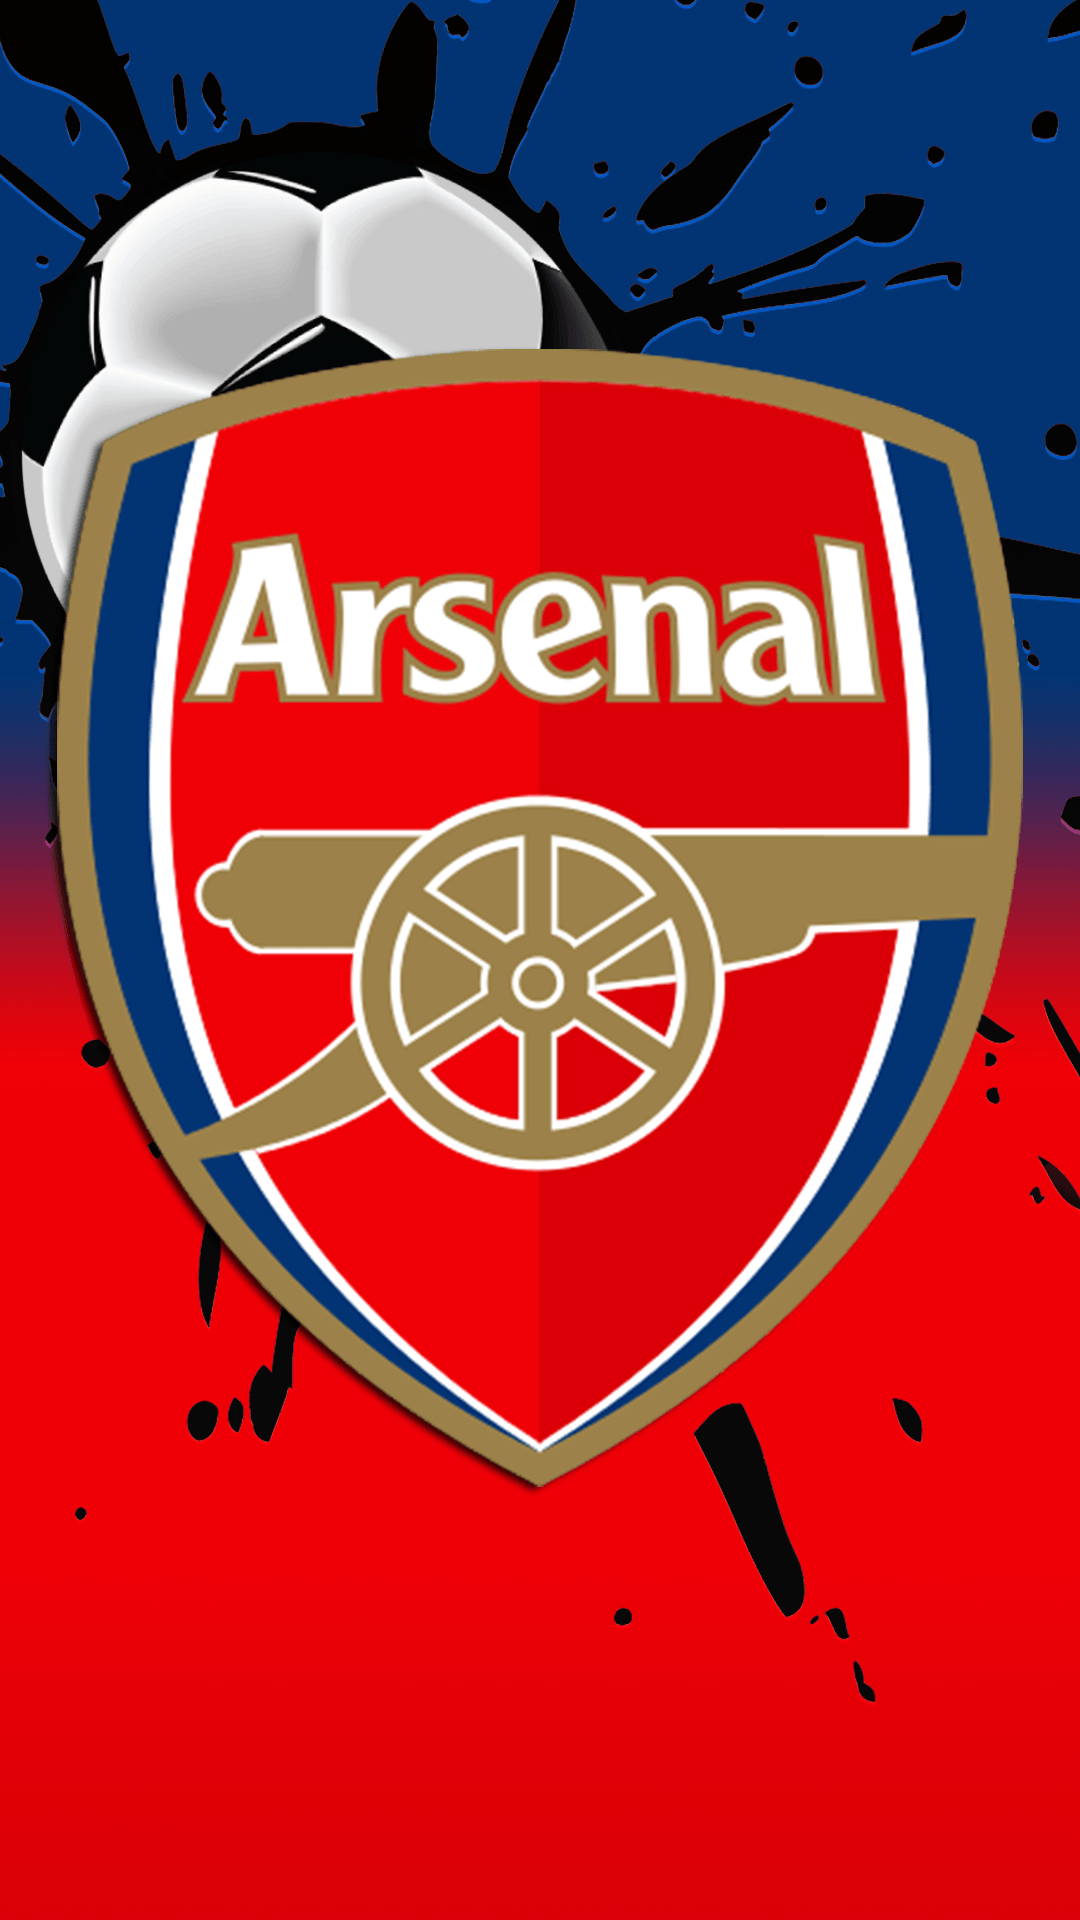 Download Our HD Arsenal Fc Wallpaper For Android Phones .0013